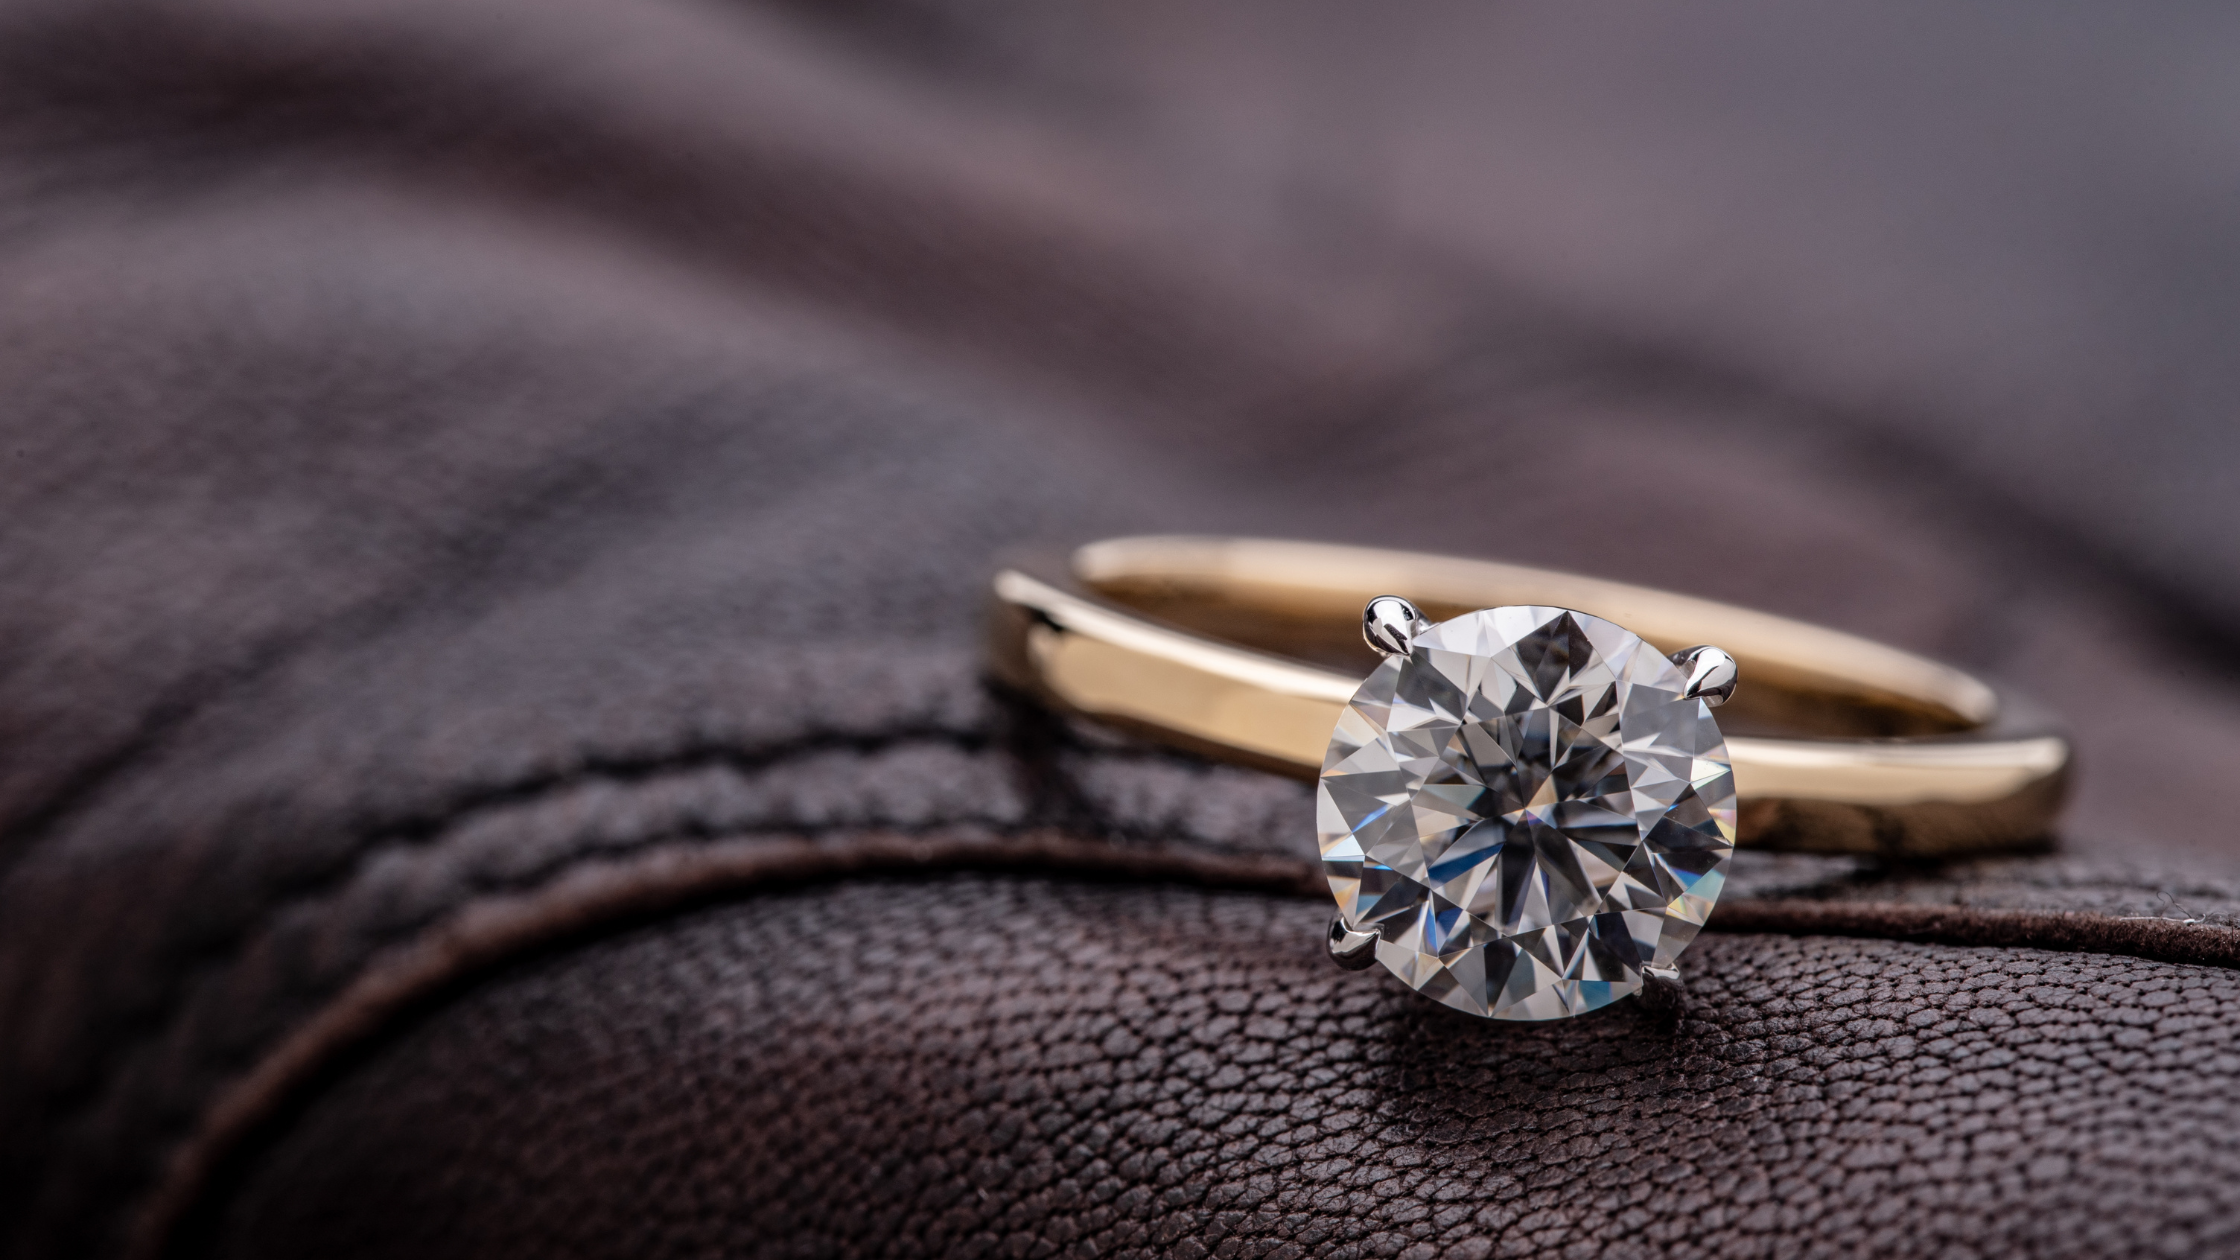 Are Gold Engagement Rings Tacky?